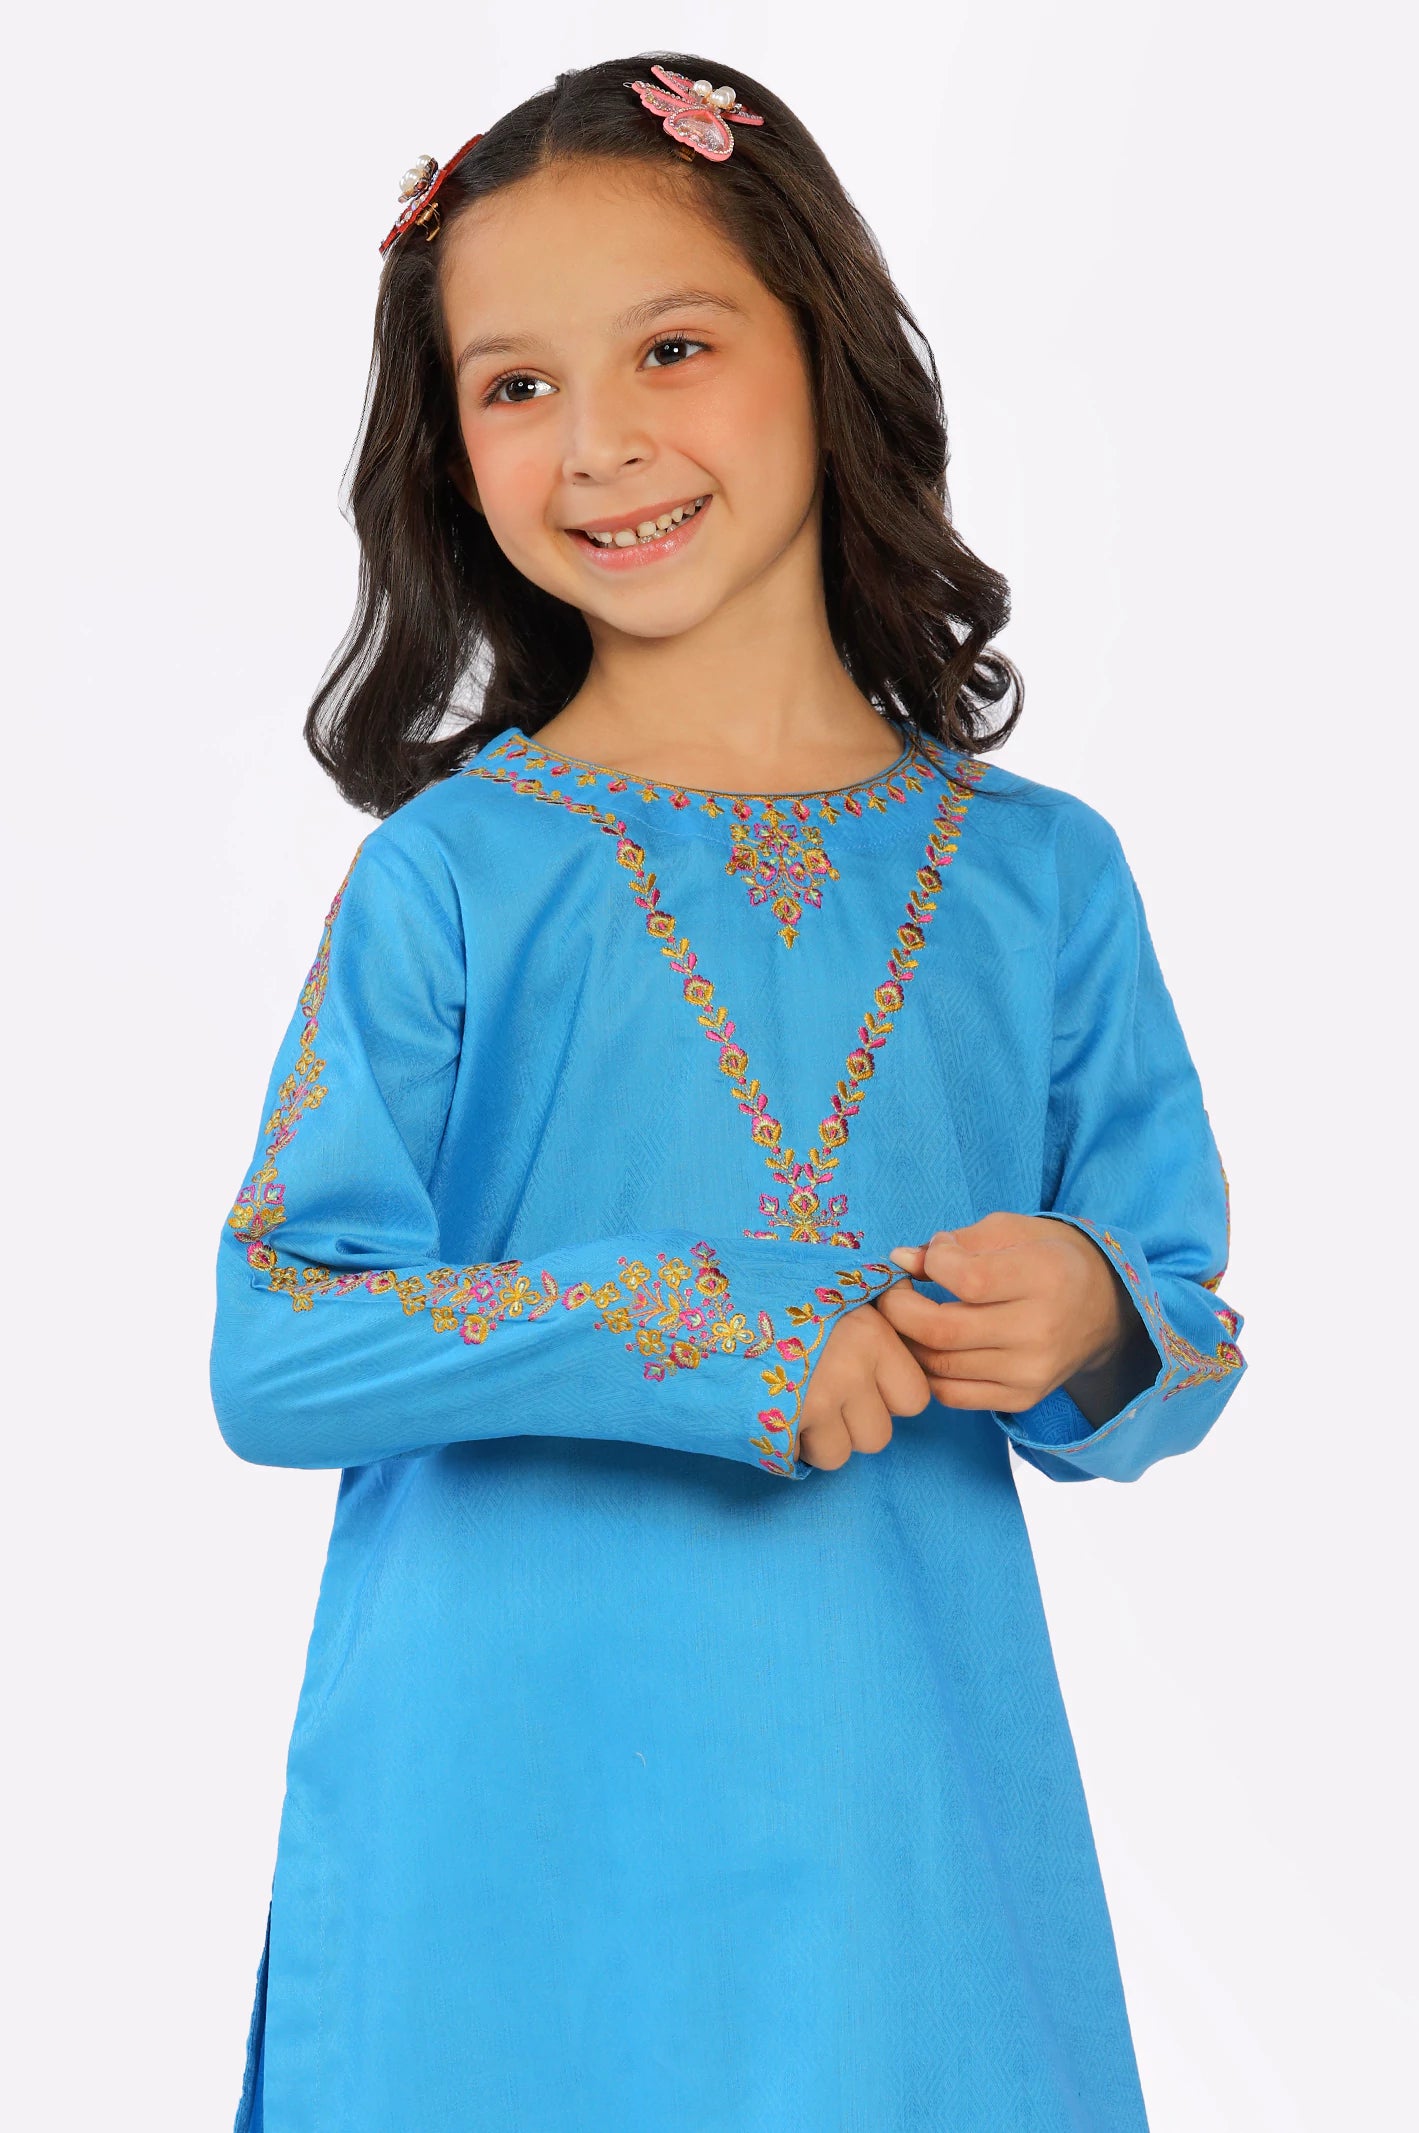 Light Blue Embroidered Girls 2PC Suit From Diners